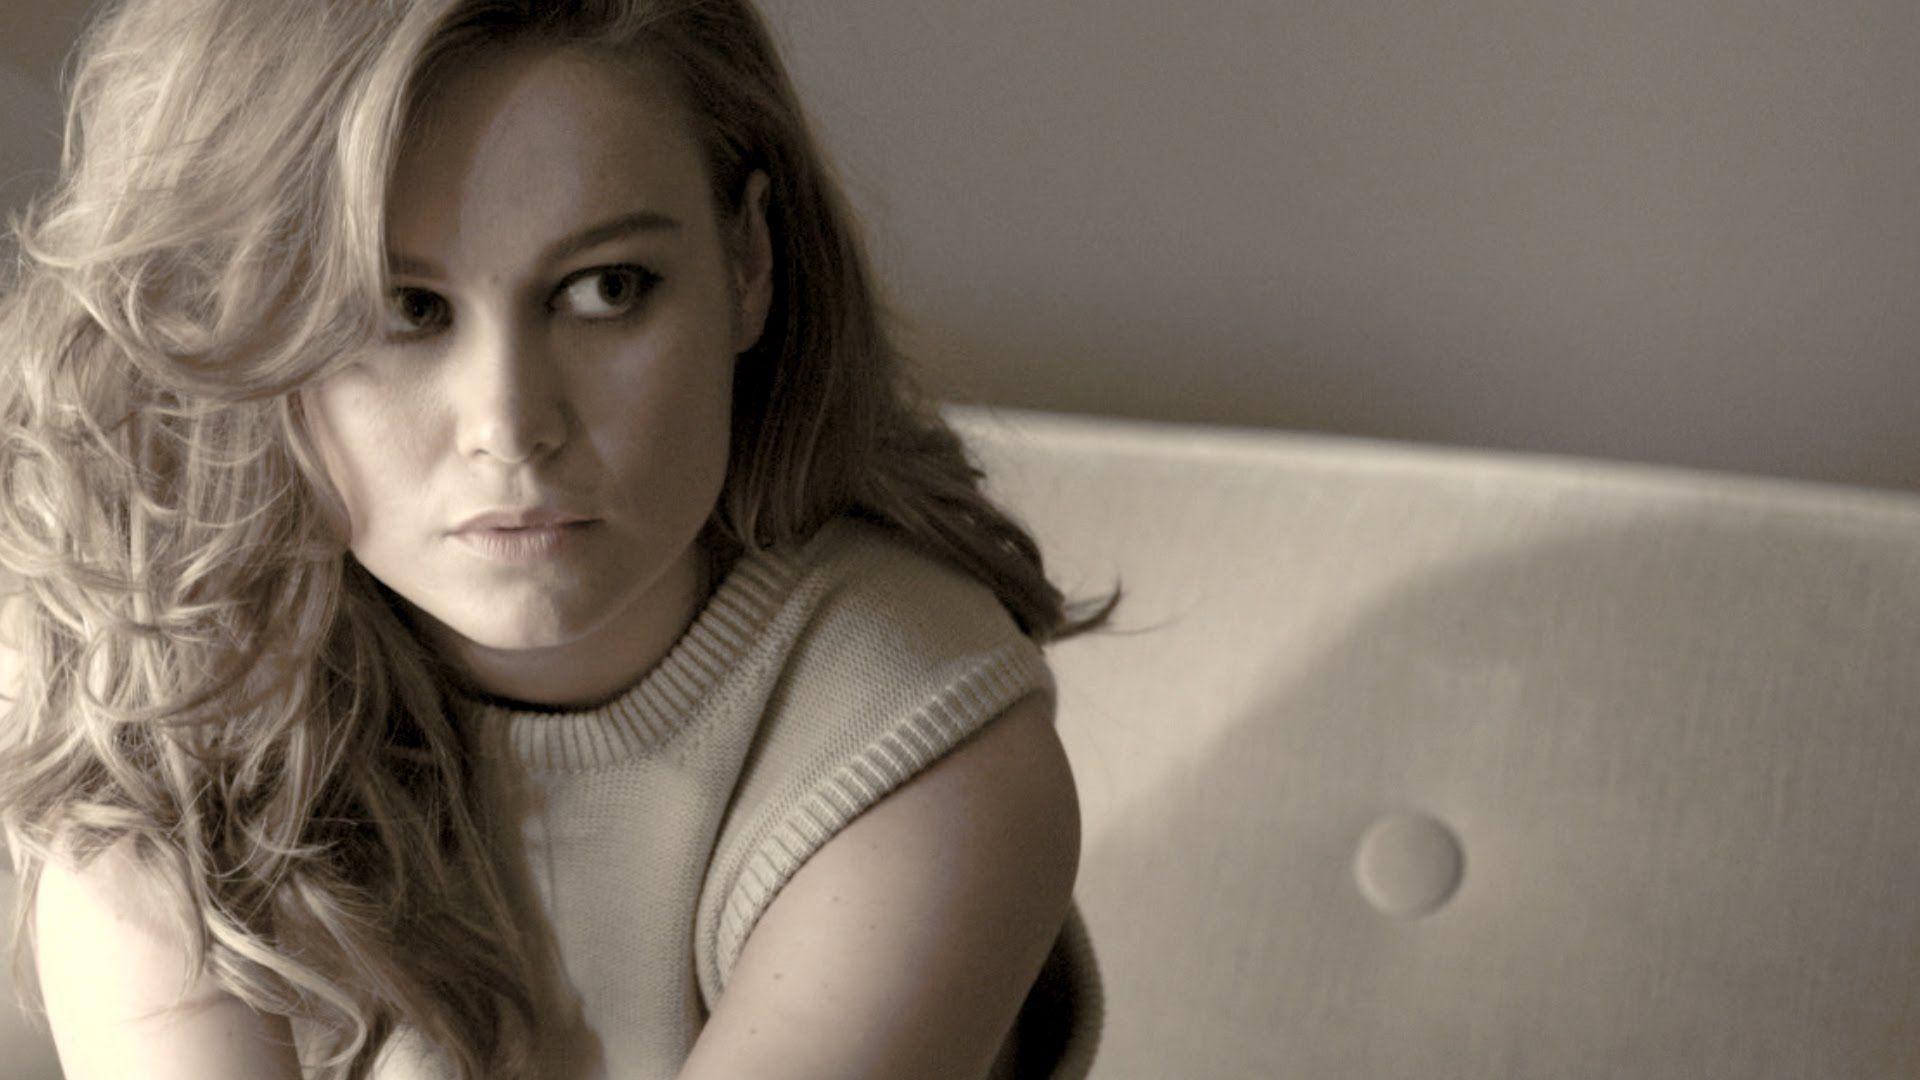 Brie Larson on the Emotional Rollercoaster of 'Room'